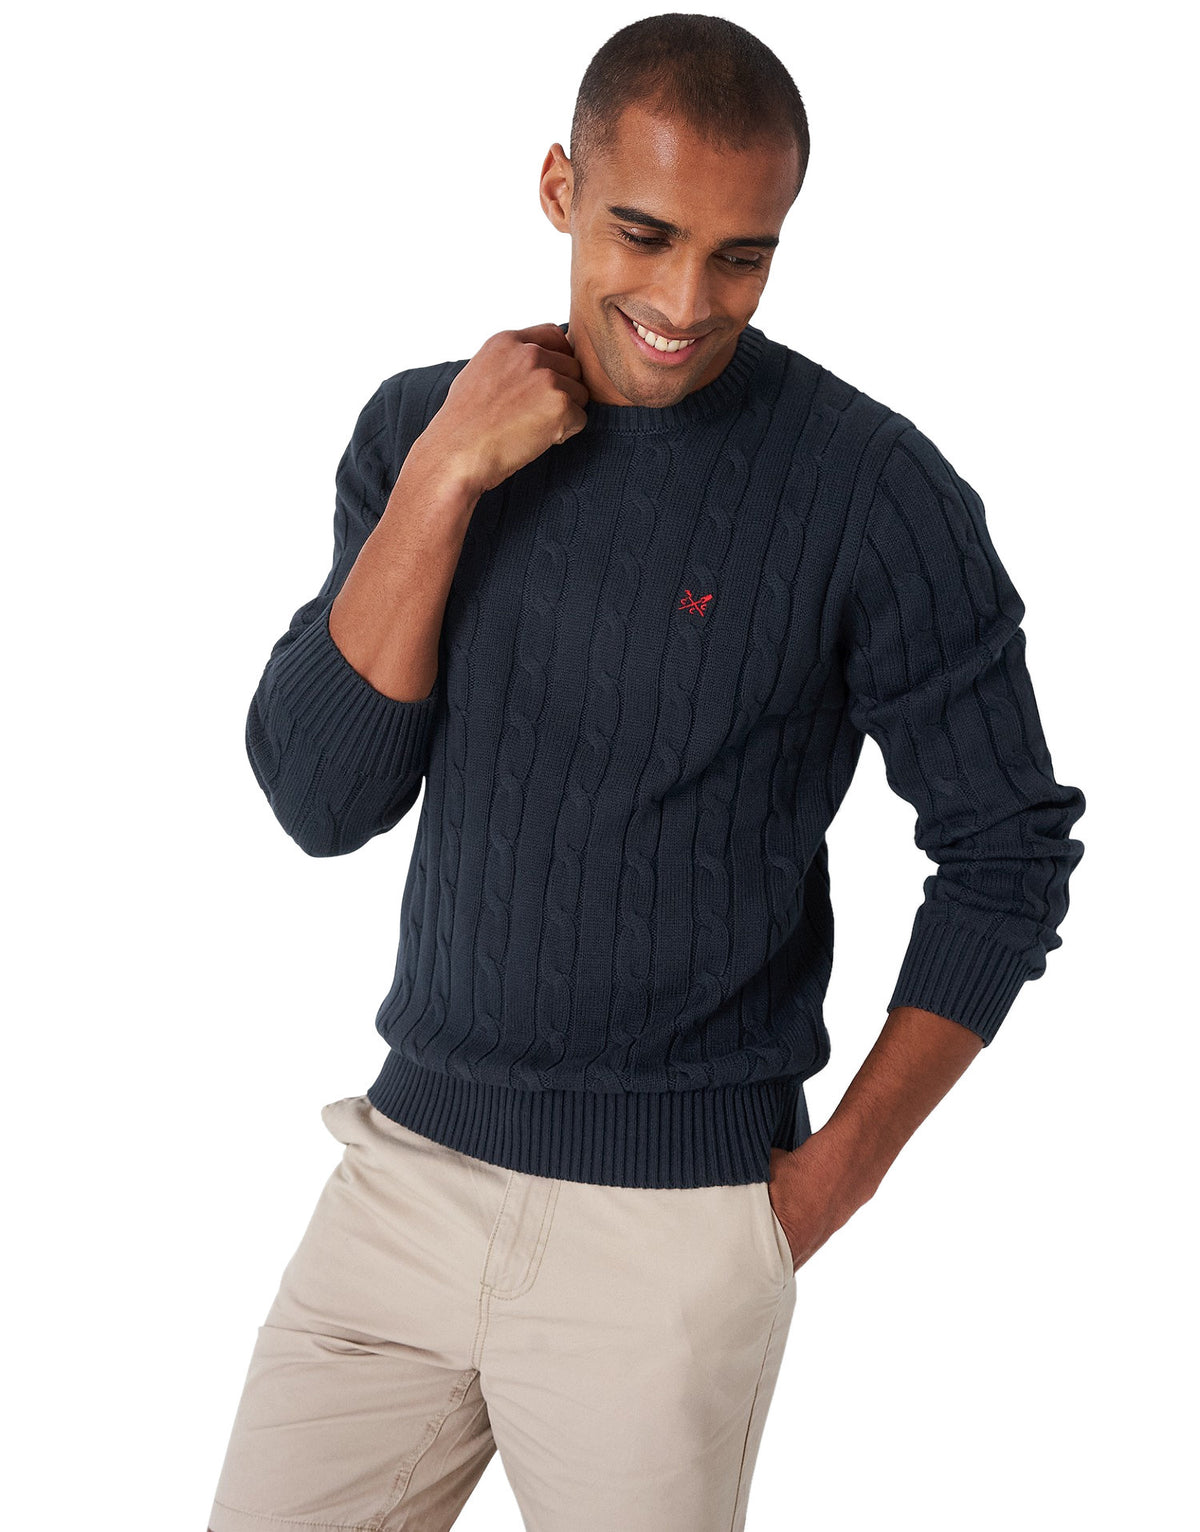 Crew Clothing Mens Cable Crew Jumper, 01, Mpc025, Navy